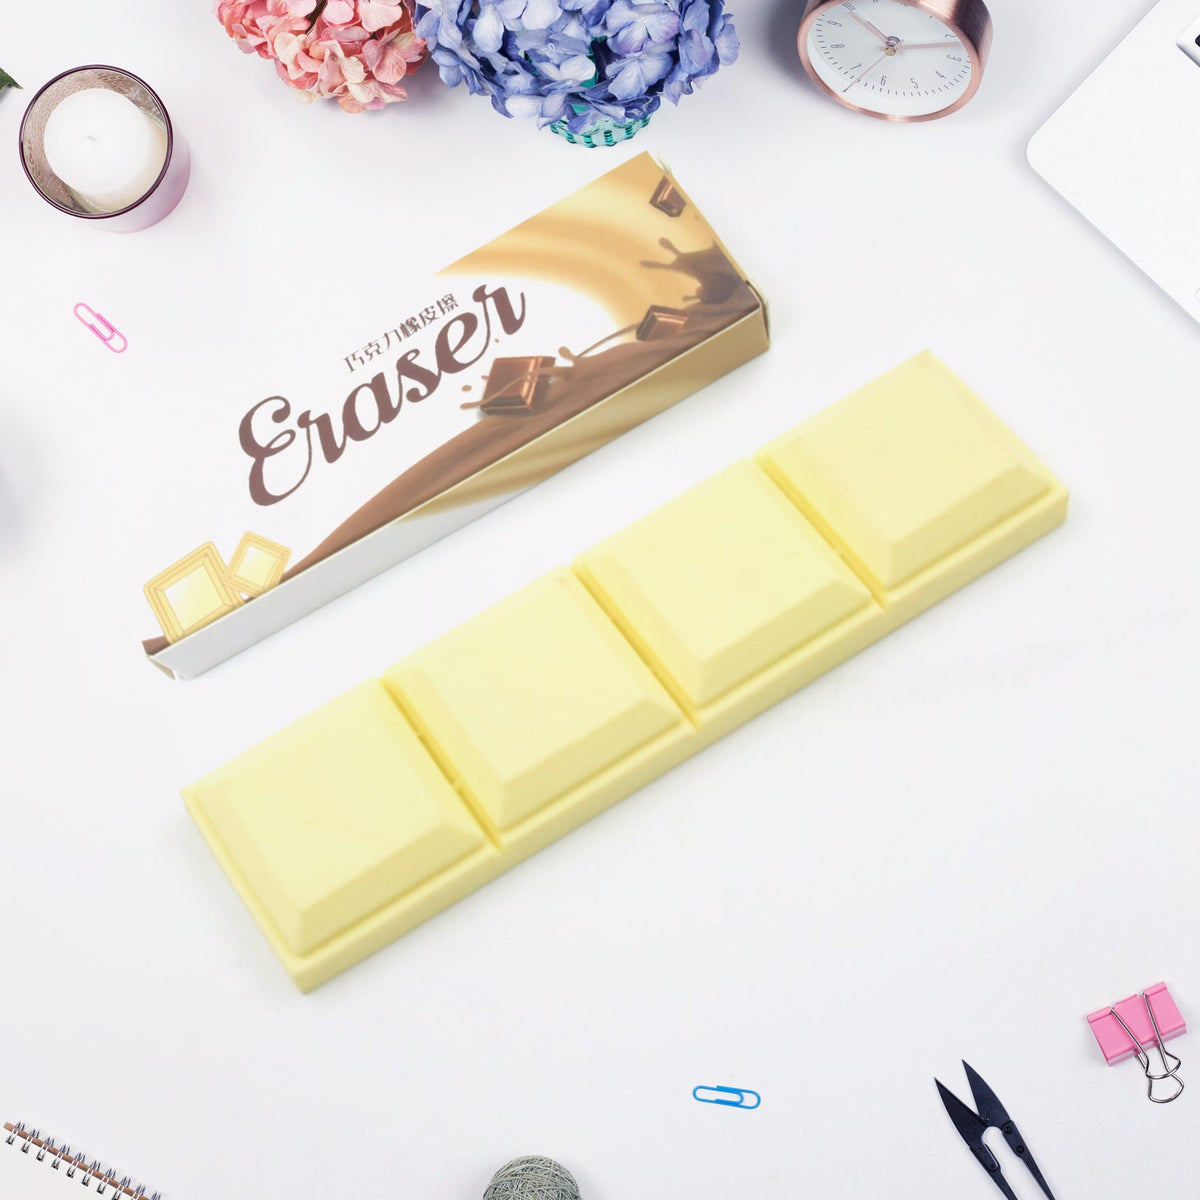 4168 3D Chocolate Shaped Erasers Soft Pencil Erasers Supplies for Office School Students Drawing Writing Classroom Rewards for Return Gift, Birthday Party, School Prize (1 Pc 4 grid)